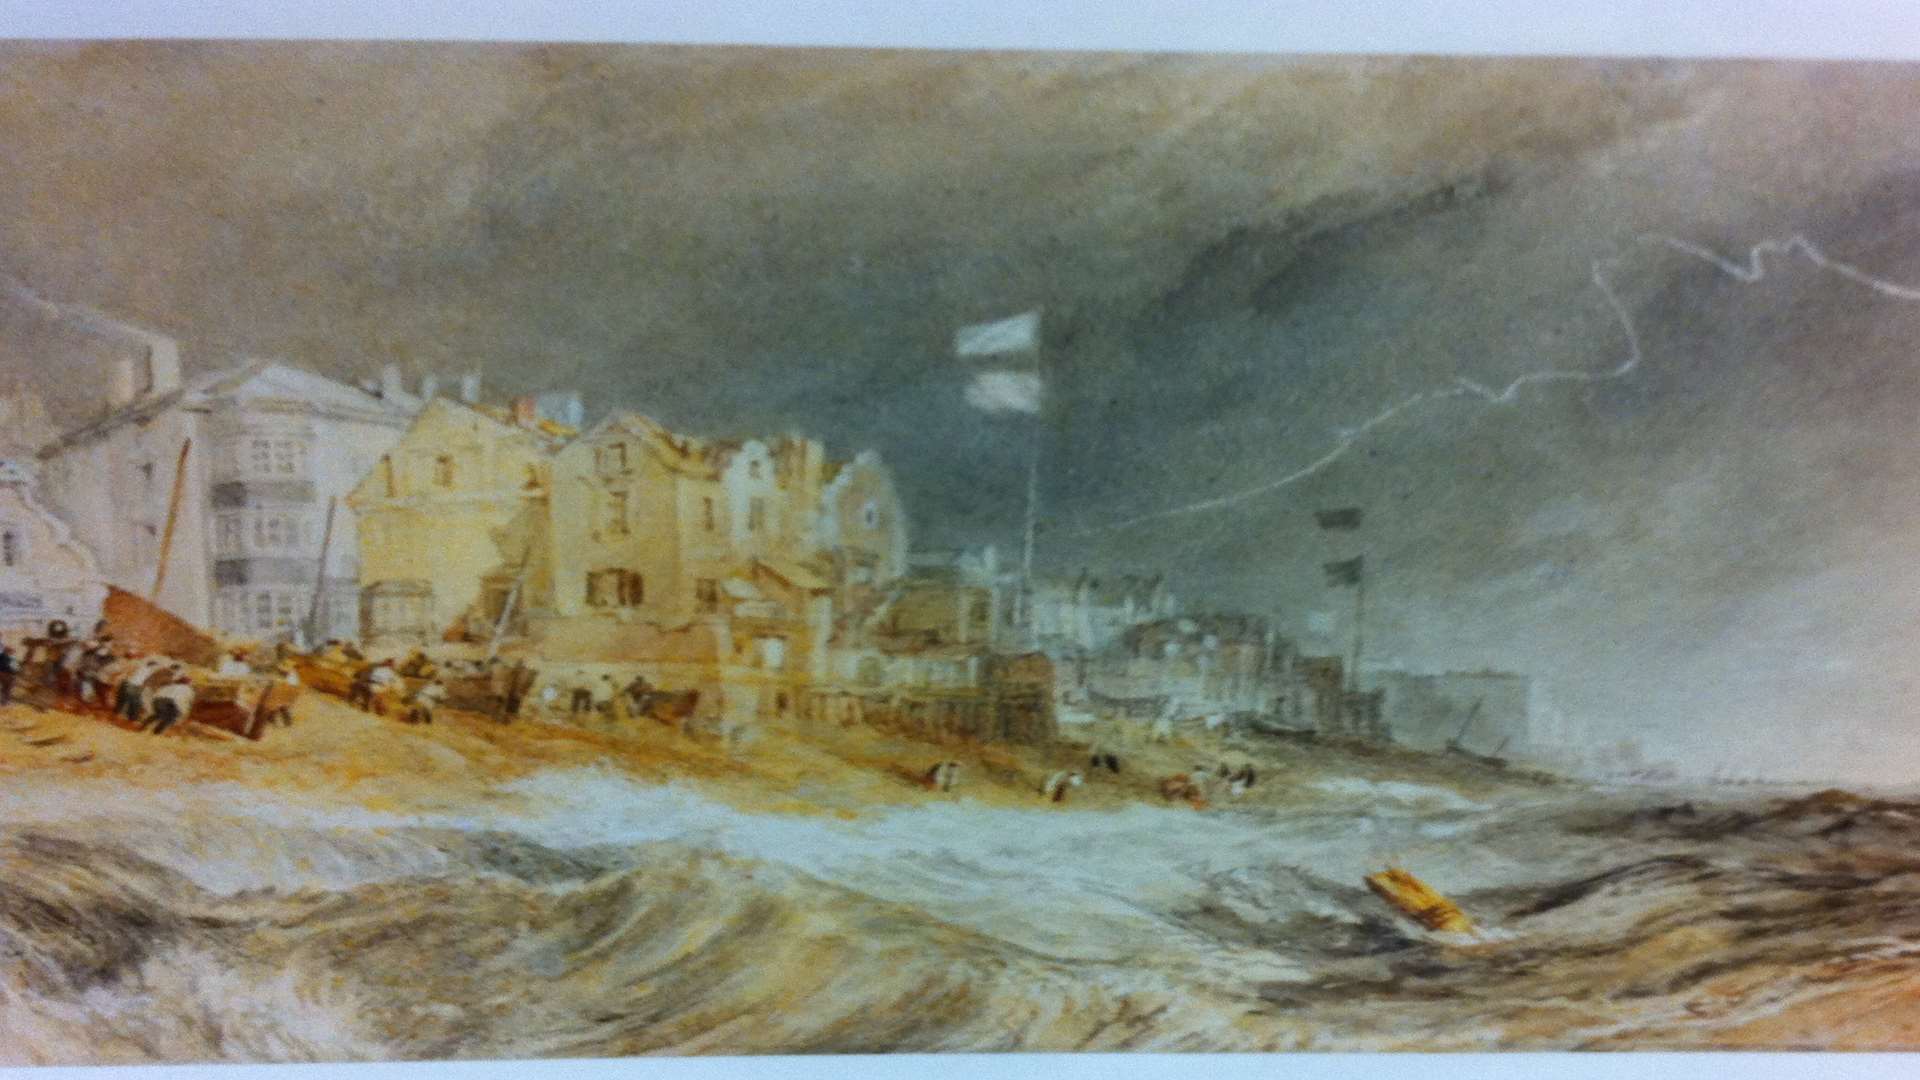 JMW Turner's painting of Deal